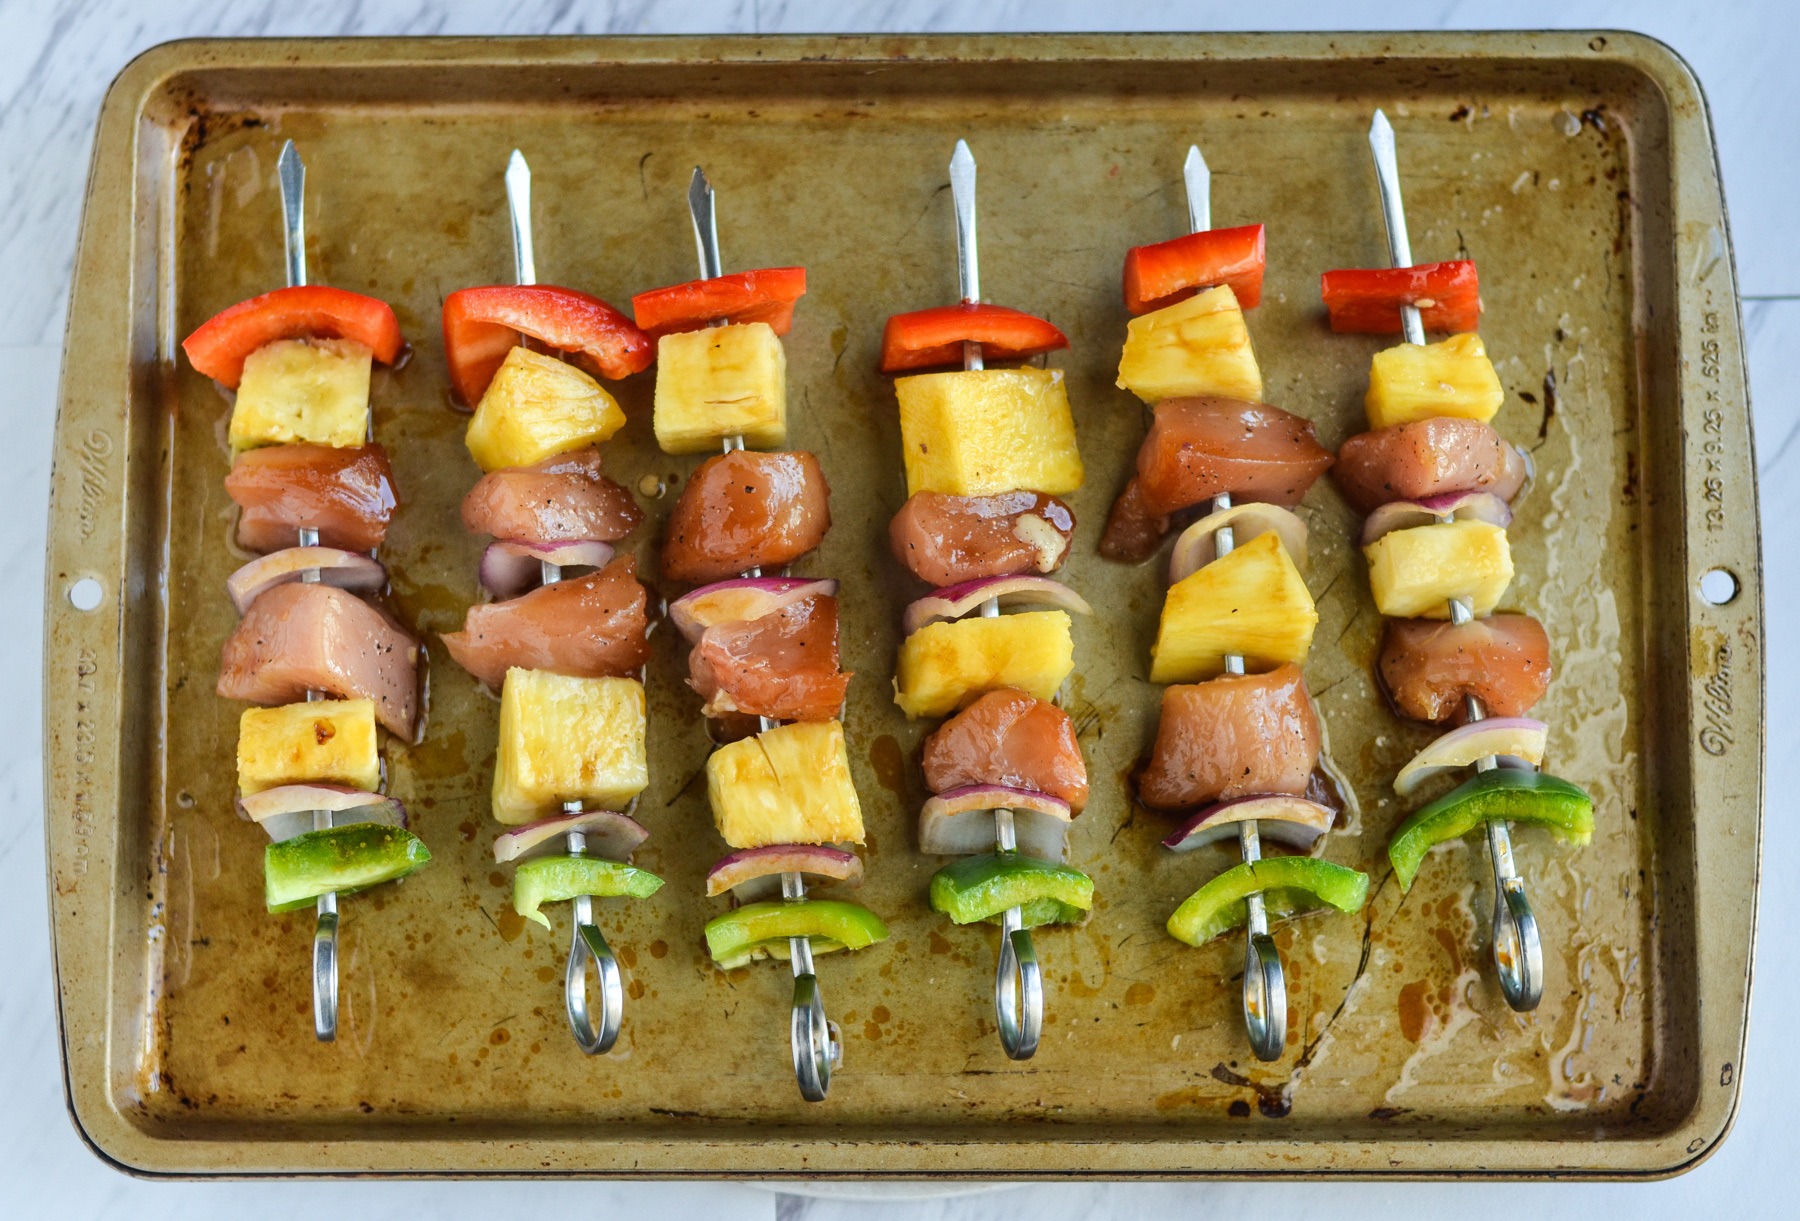 Pineapple chicken kebabs on skewers ready to grill